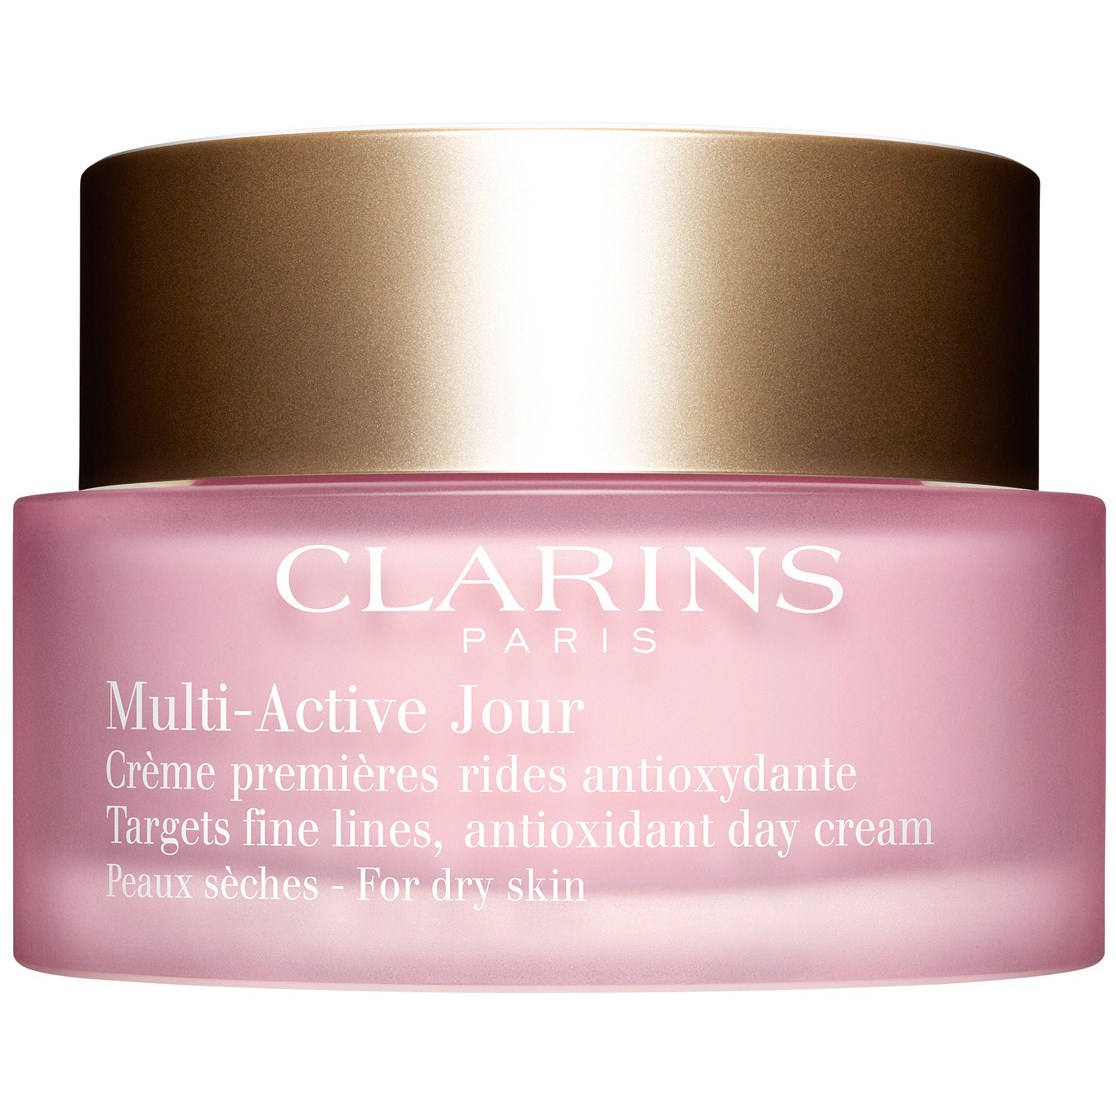 Clarins Multi-Active Jour Day Cream For Dry Skin 50ml